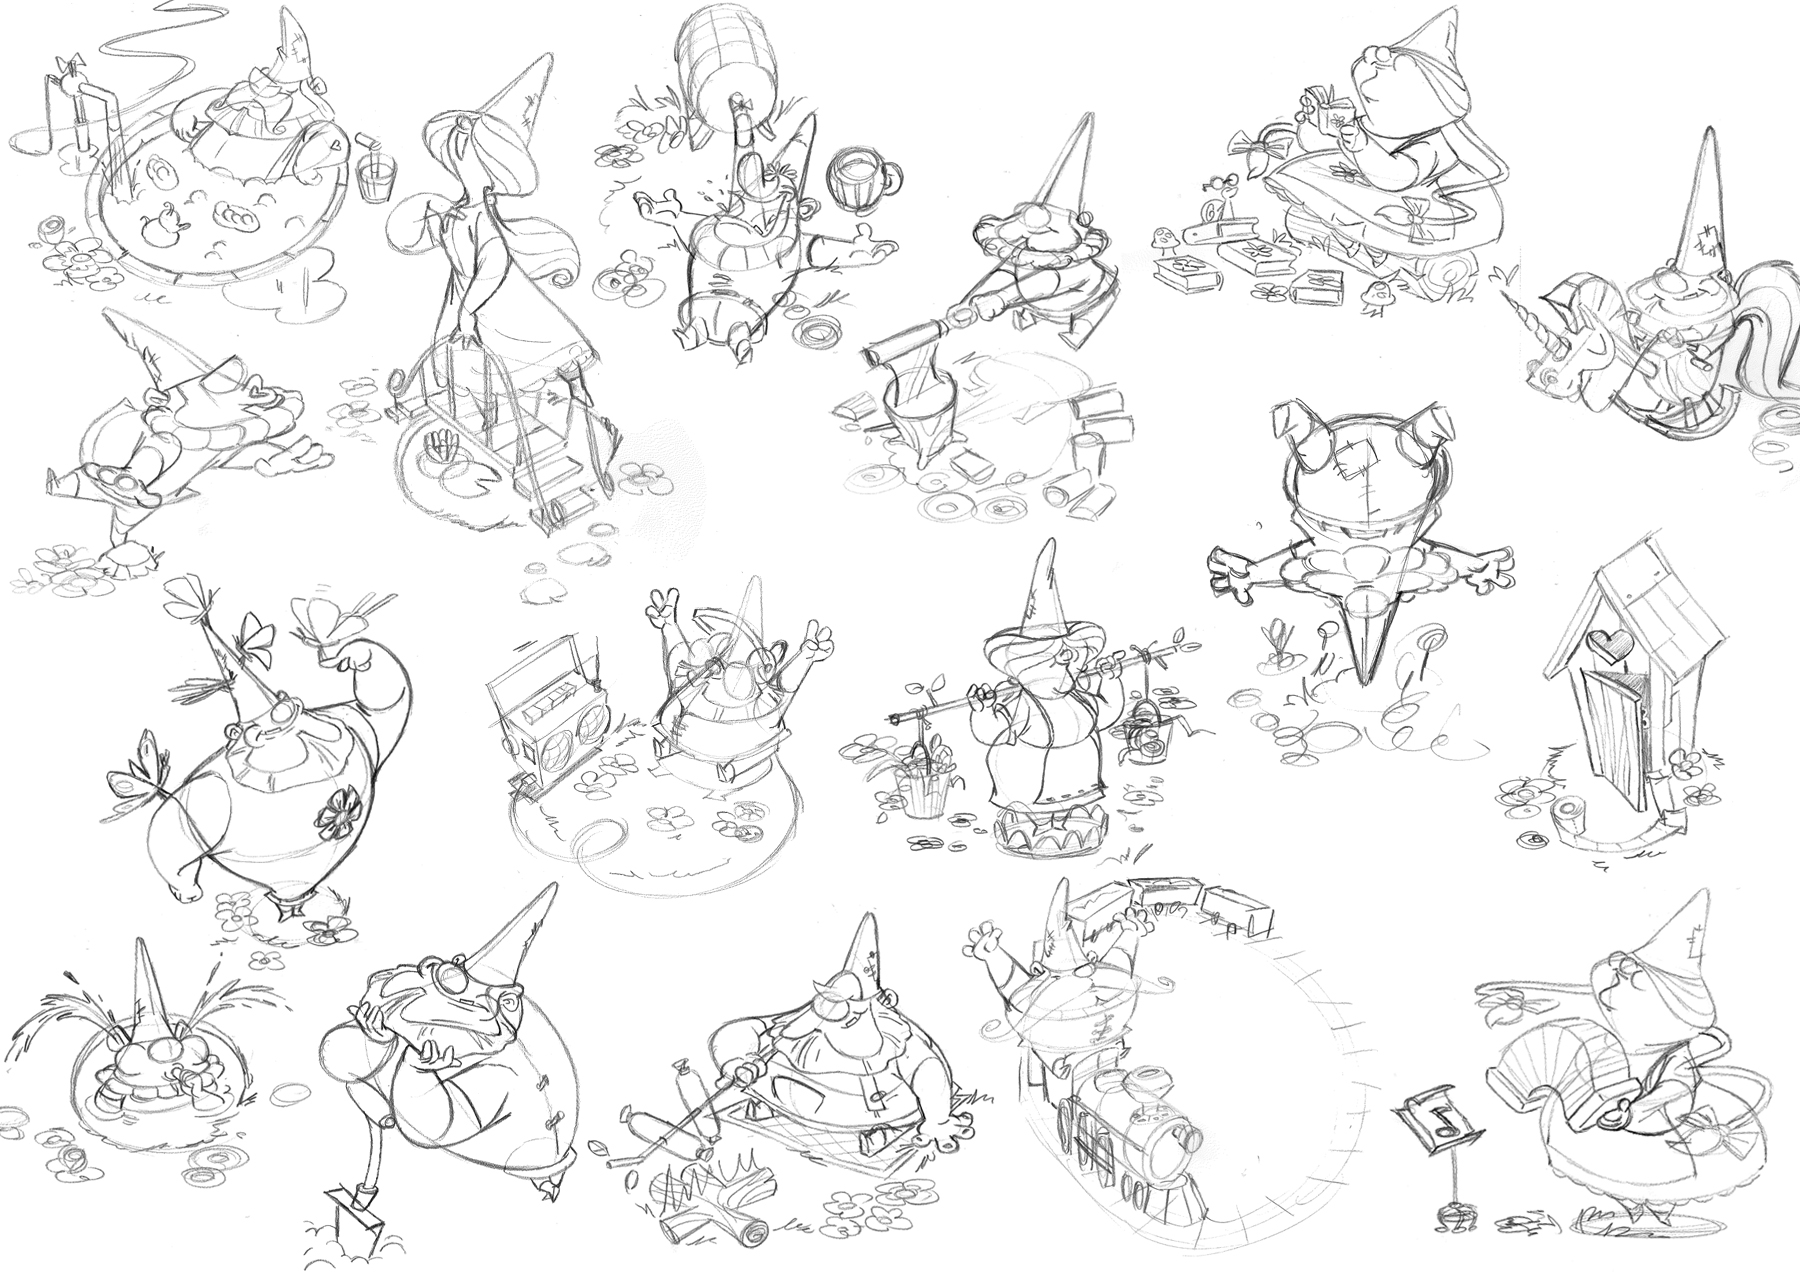 Black and white sketches of different gnomes in various humorous poses